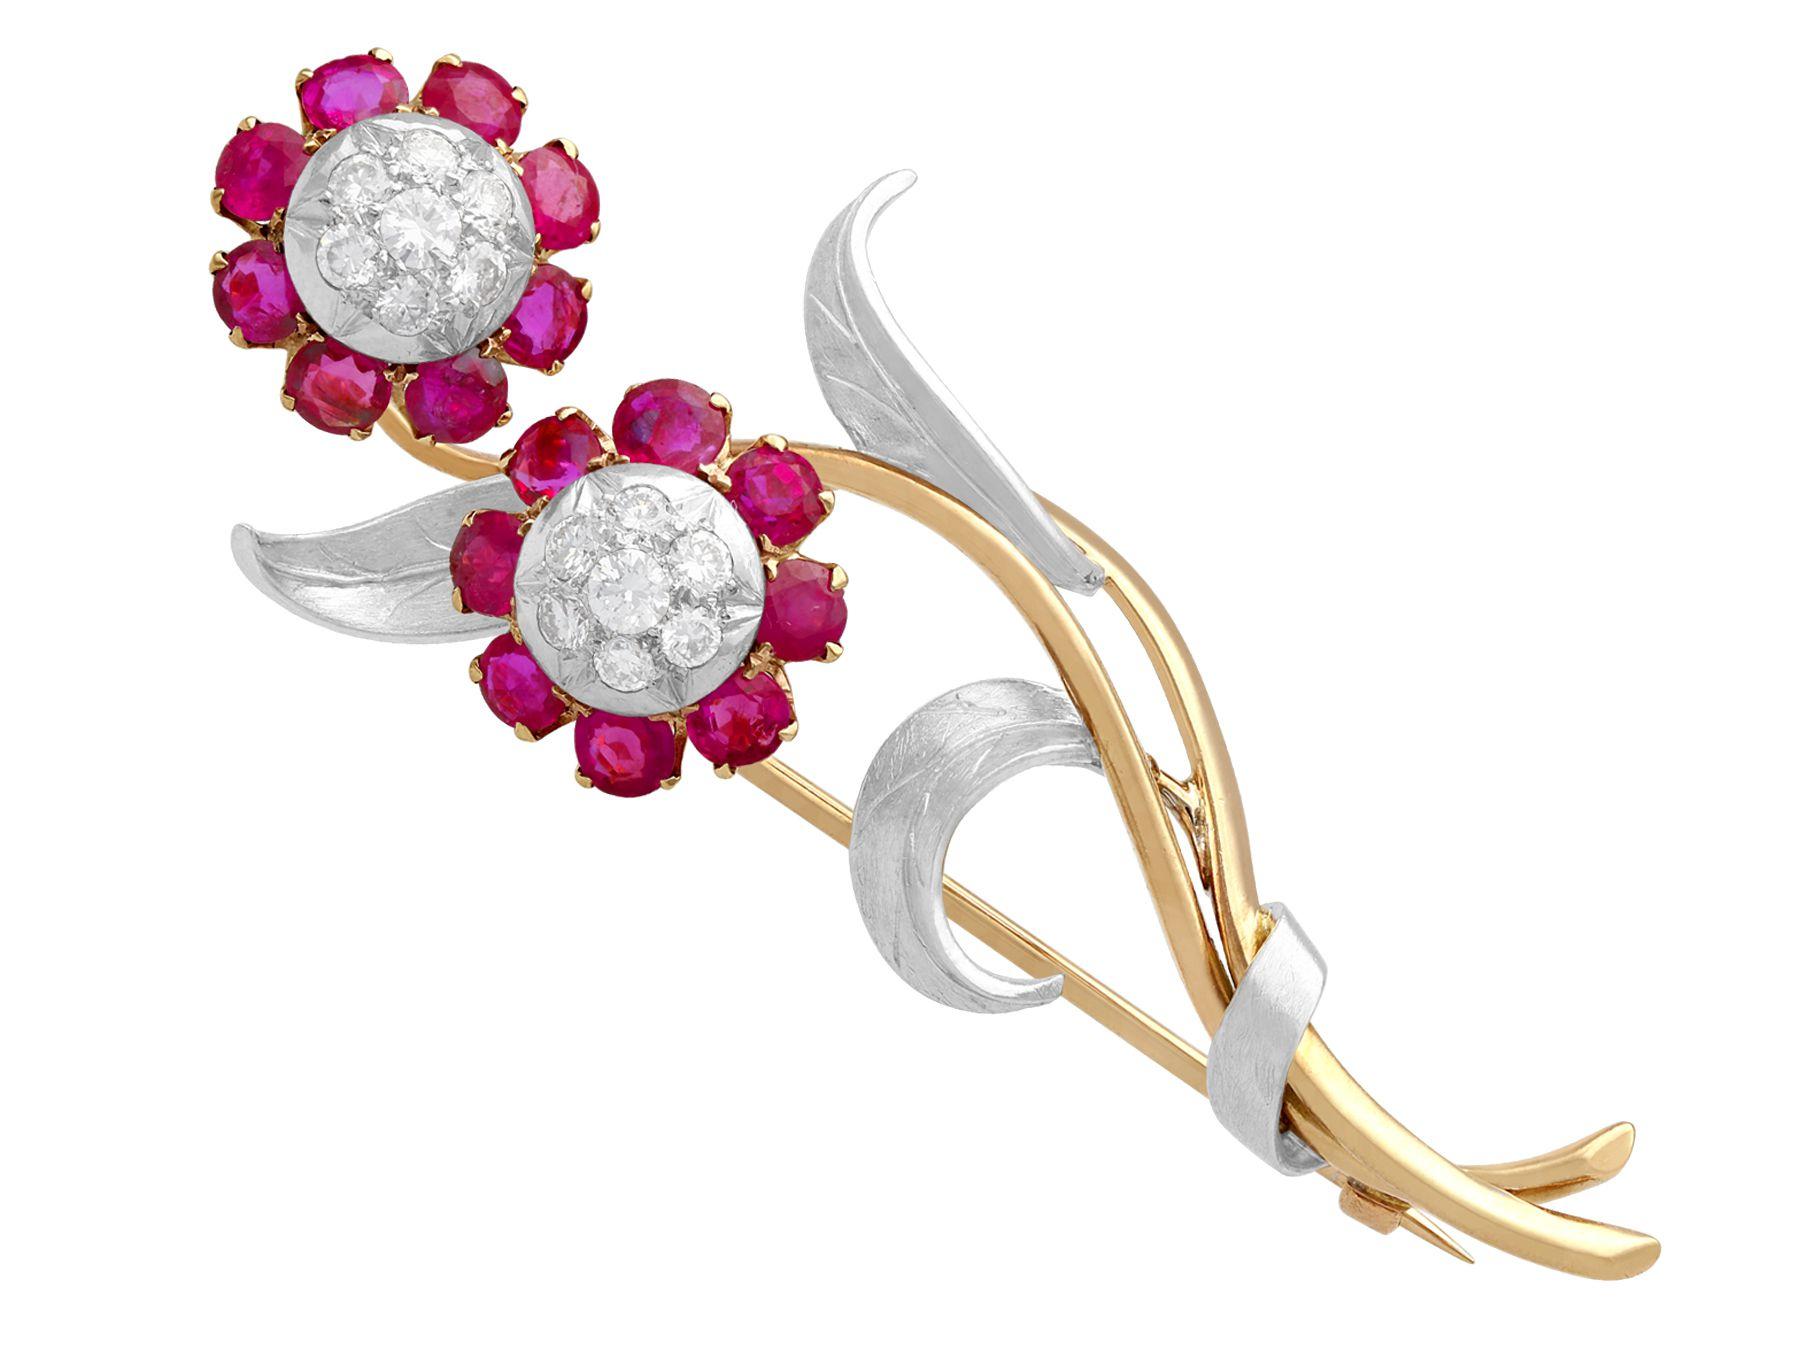 A stunning, fine and impressive, rare antique 2.91 carat ruby and 0.82 carat diamond, 10 karat yellow gold and silver set flower brooch / earring set; part of our diverse antique jewelry collections

This stunning, fine and impressive antique